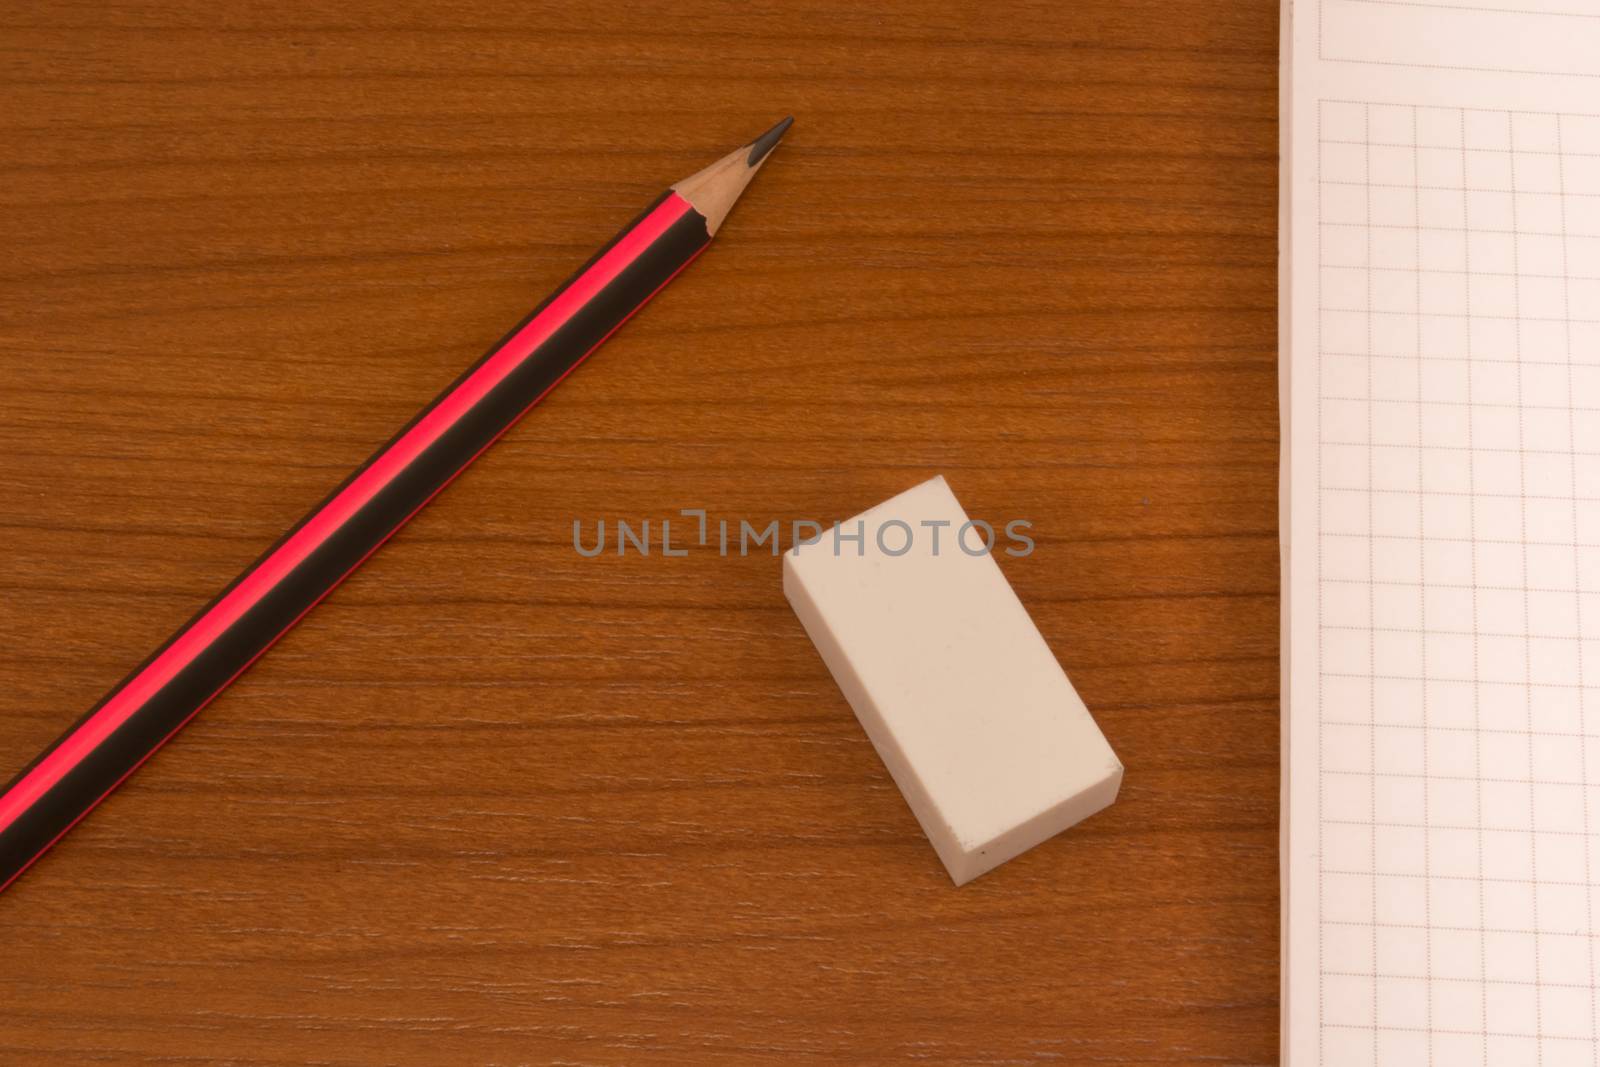 Wooden table with pencil, notebook and eraser